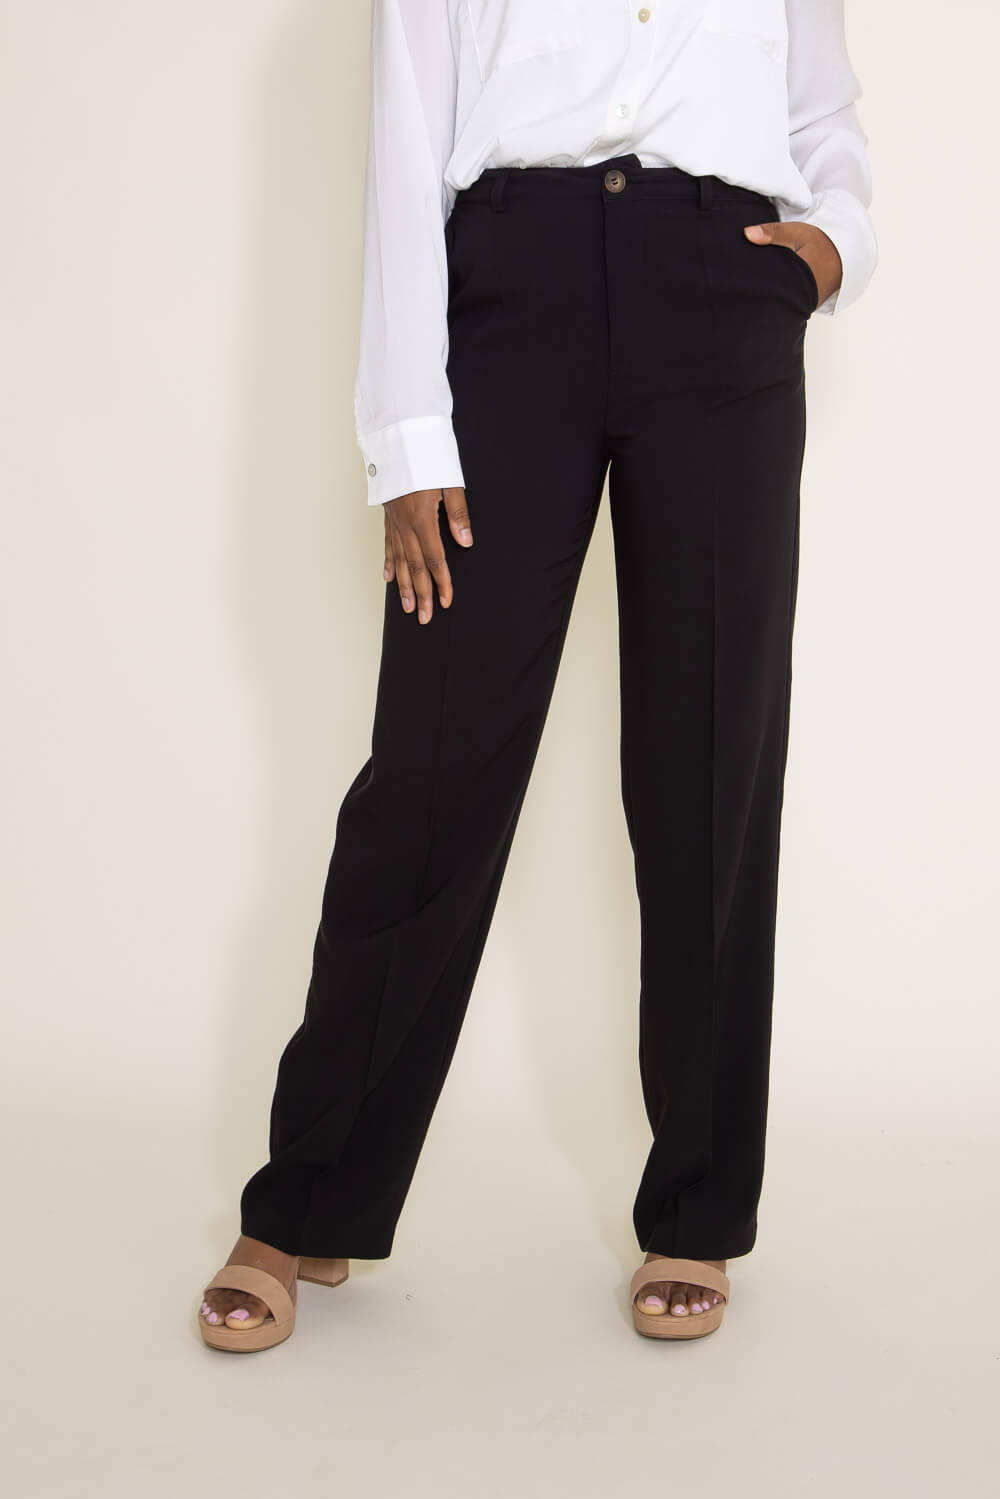 Westbound the PARK AVE fit Denim Mid Rise Straight Leg Pull-On Pants |  Dillard's